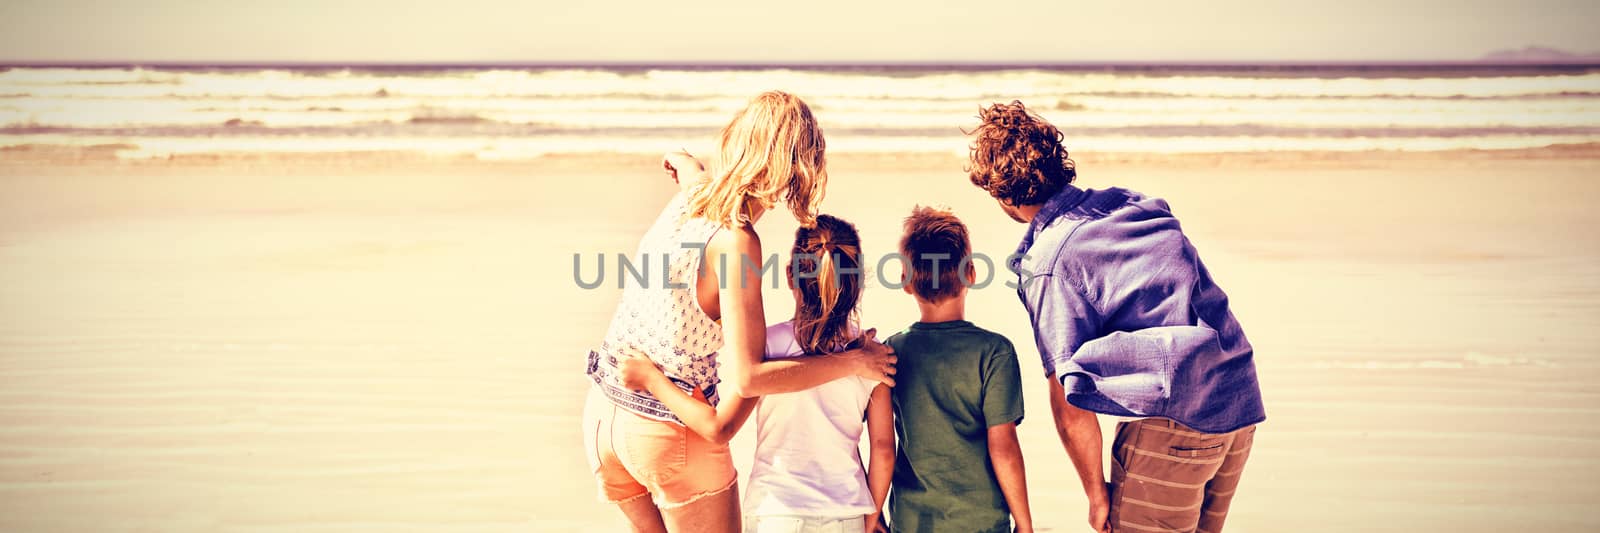 Rear view of family standing together on shore at beach during sunny day